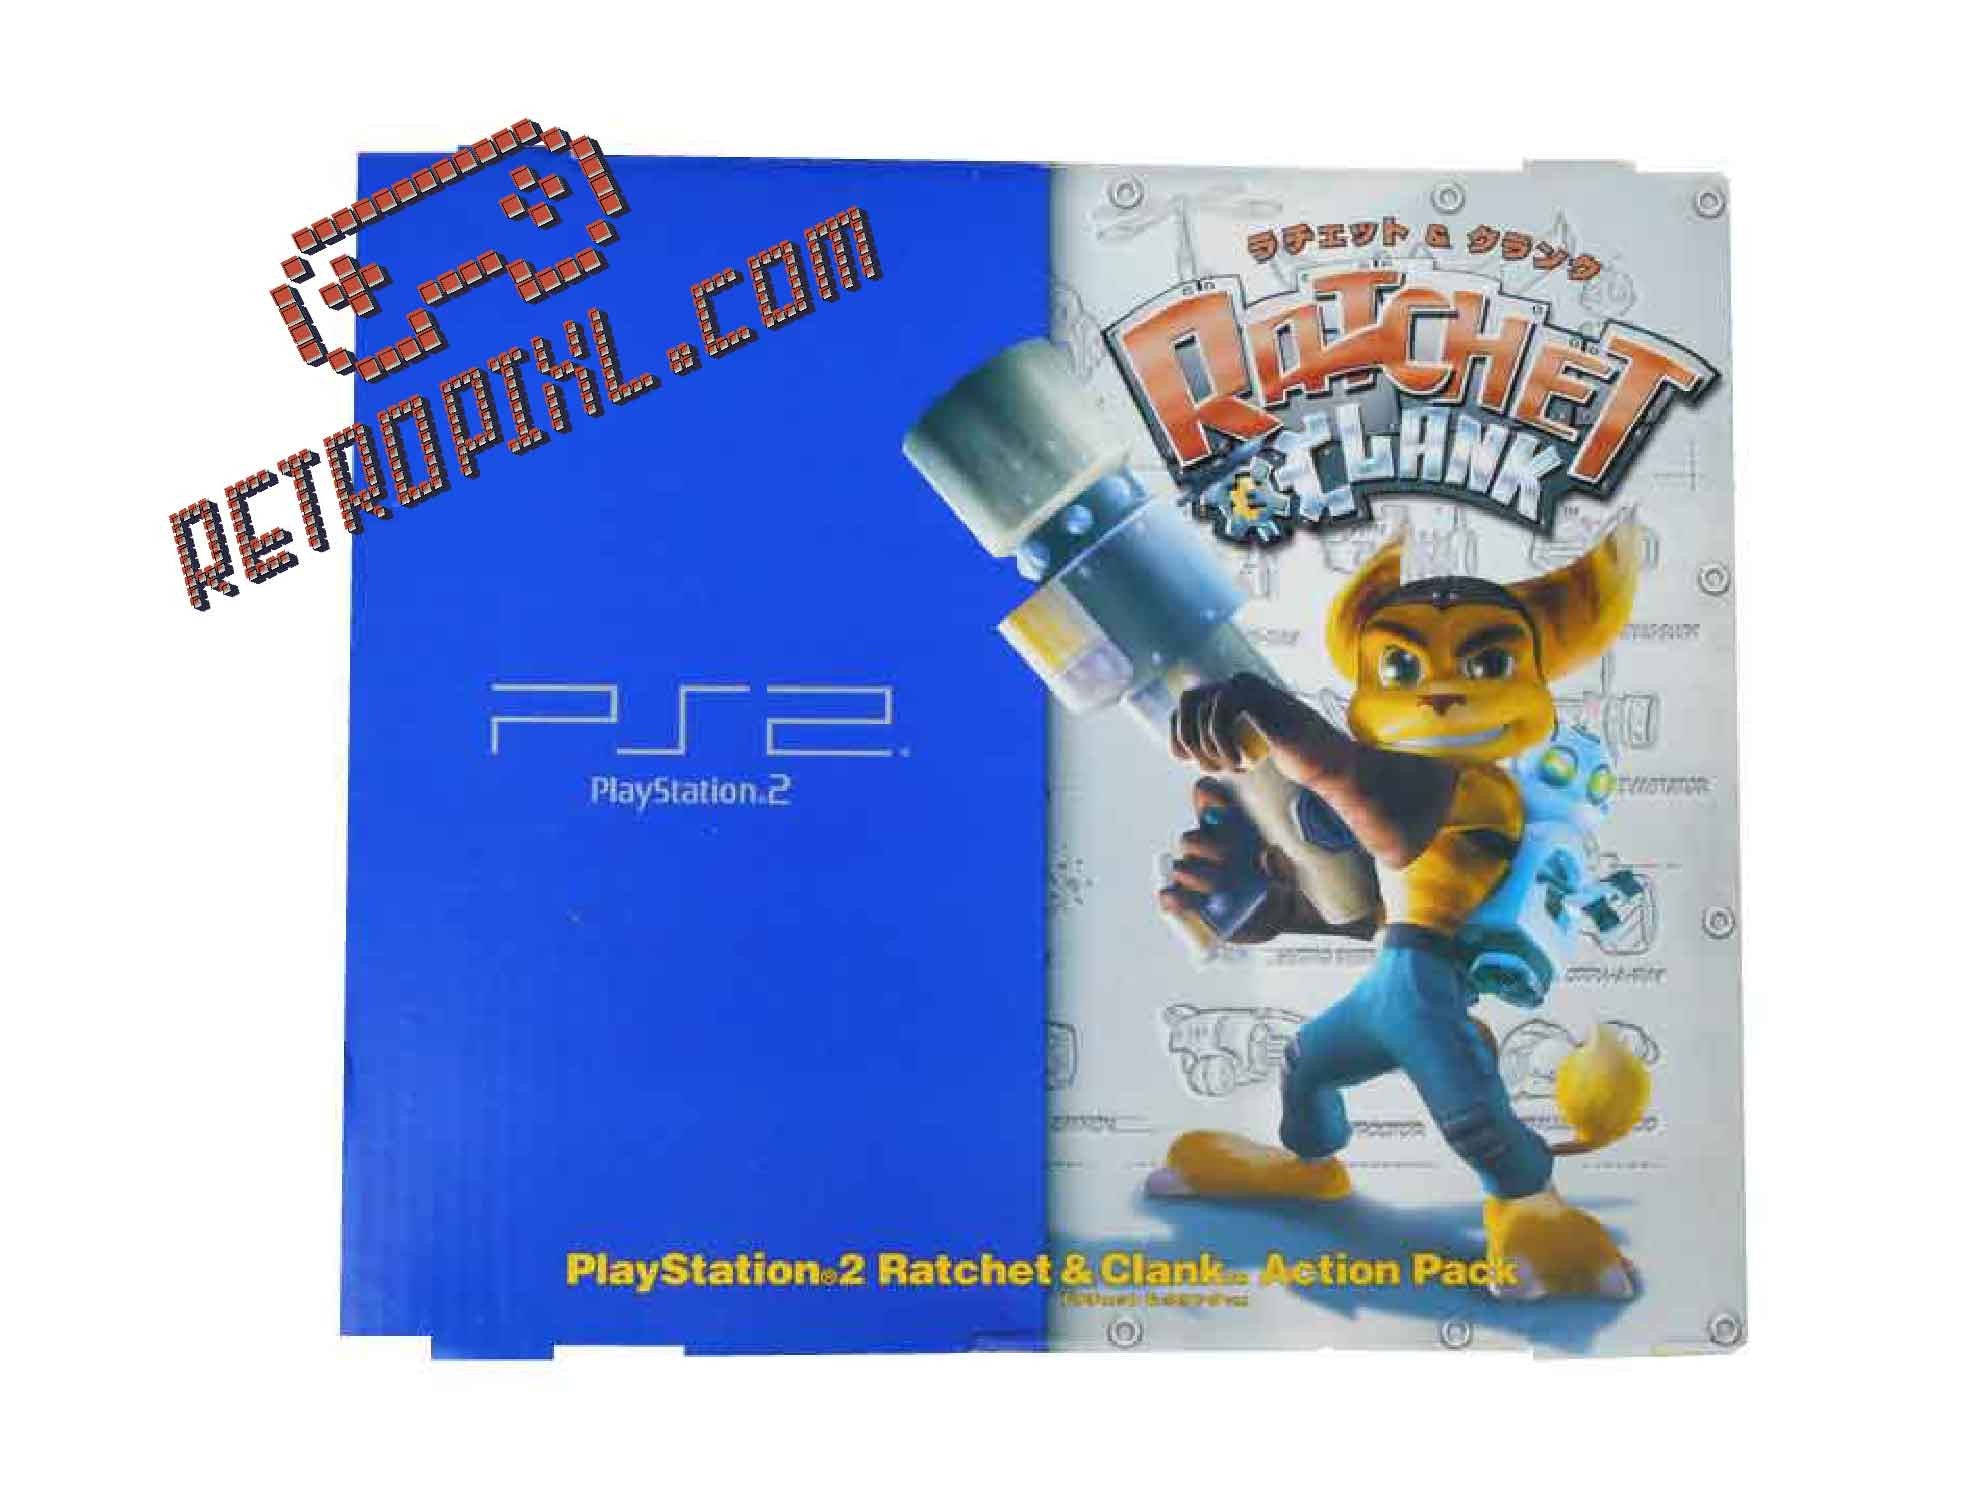 Sony Playstation 2 Ratchet & Clank LIMITED EDITION